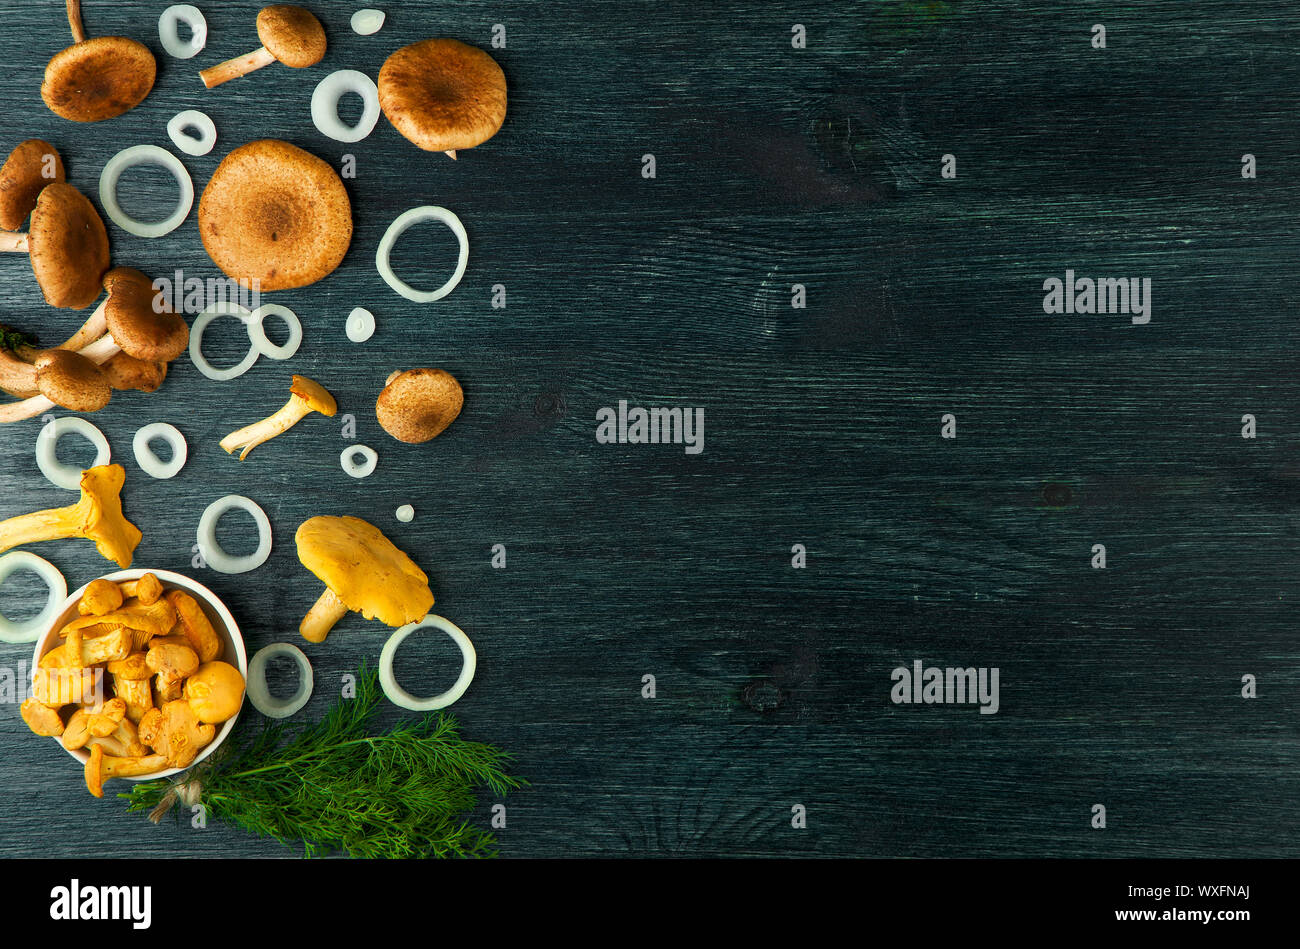 Fresh mushrooms with spices and herbs on black board. View from above. Copy space. Stock Photo